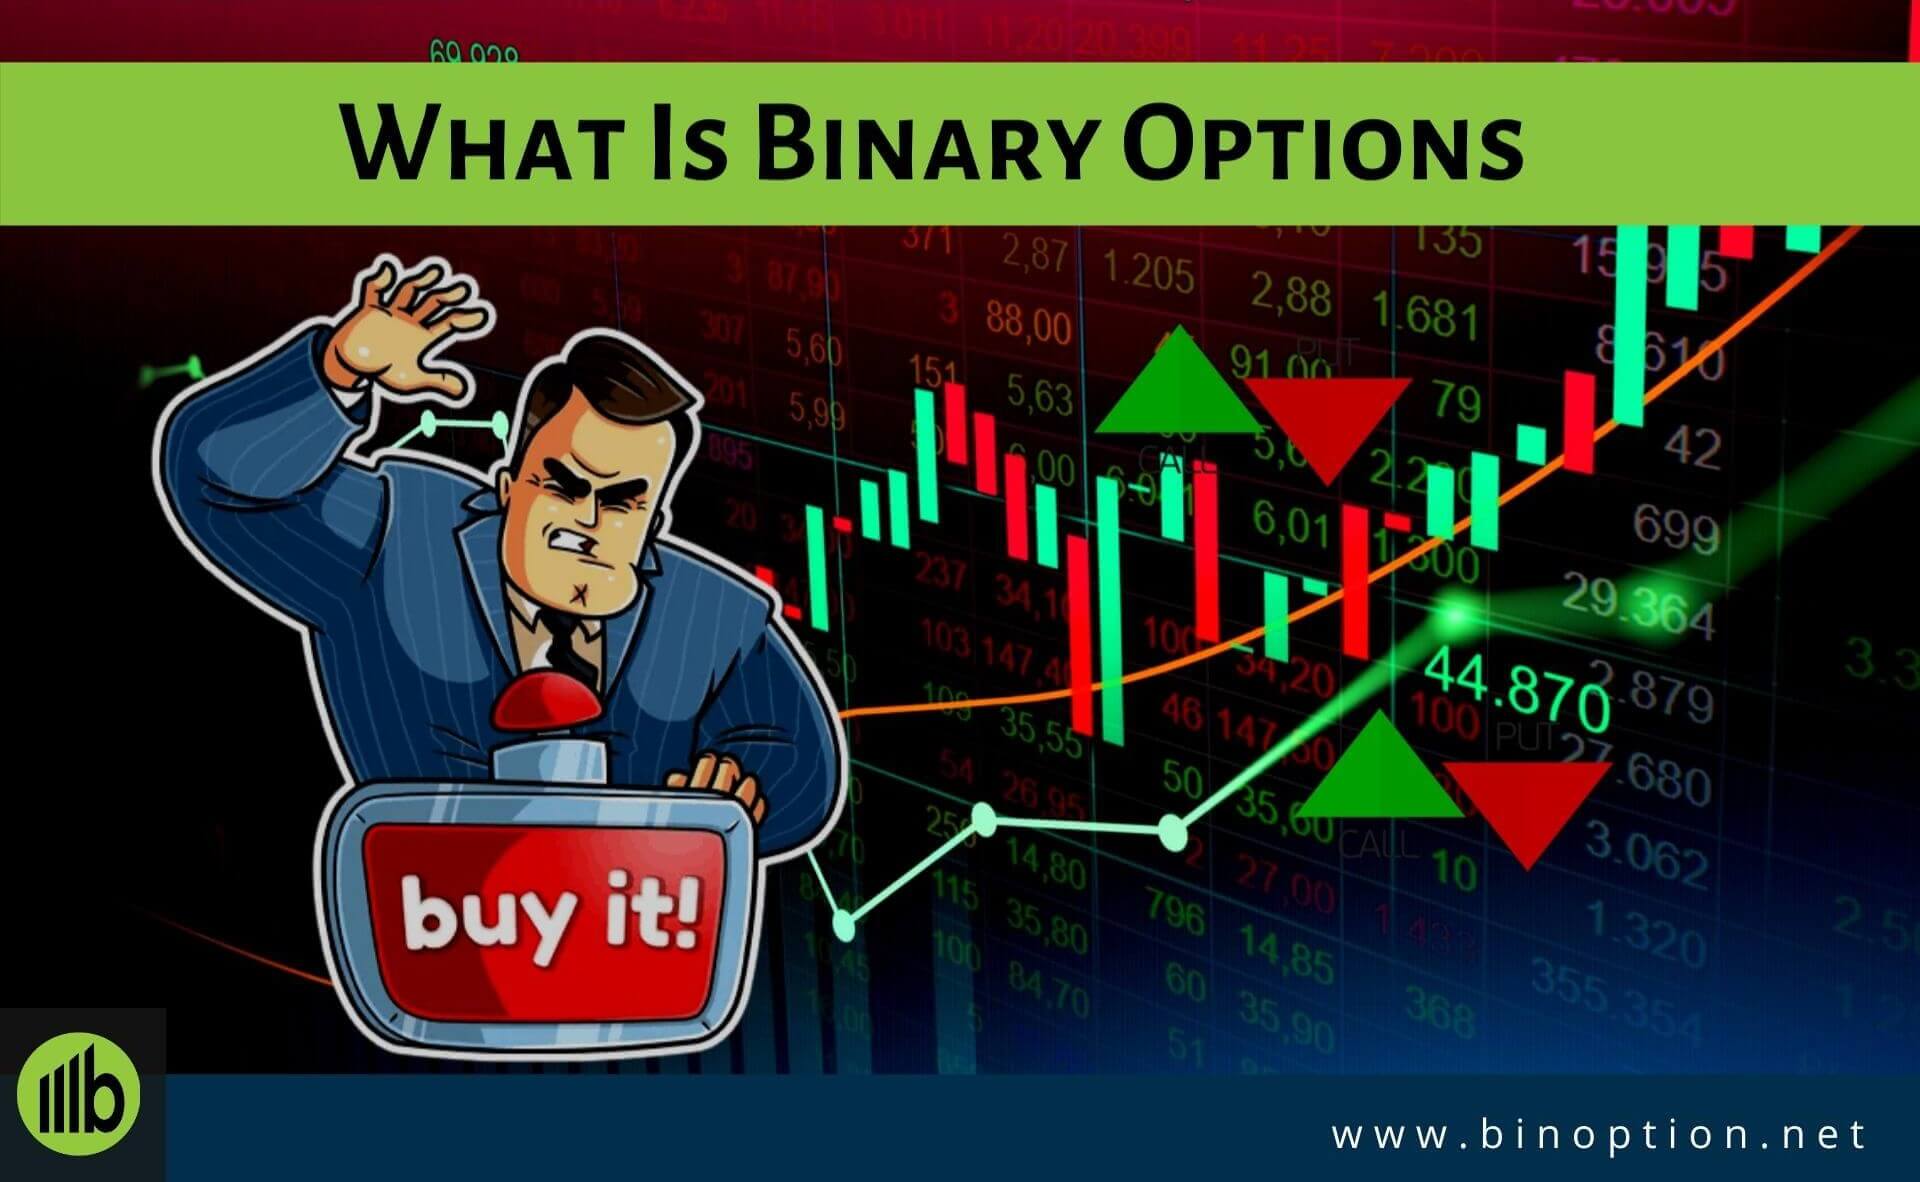 Binary options trading strategy that generates 150 return